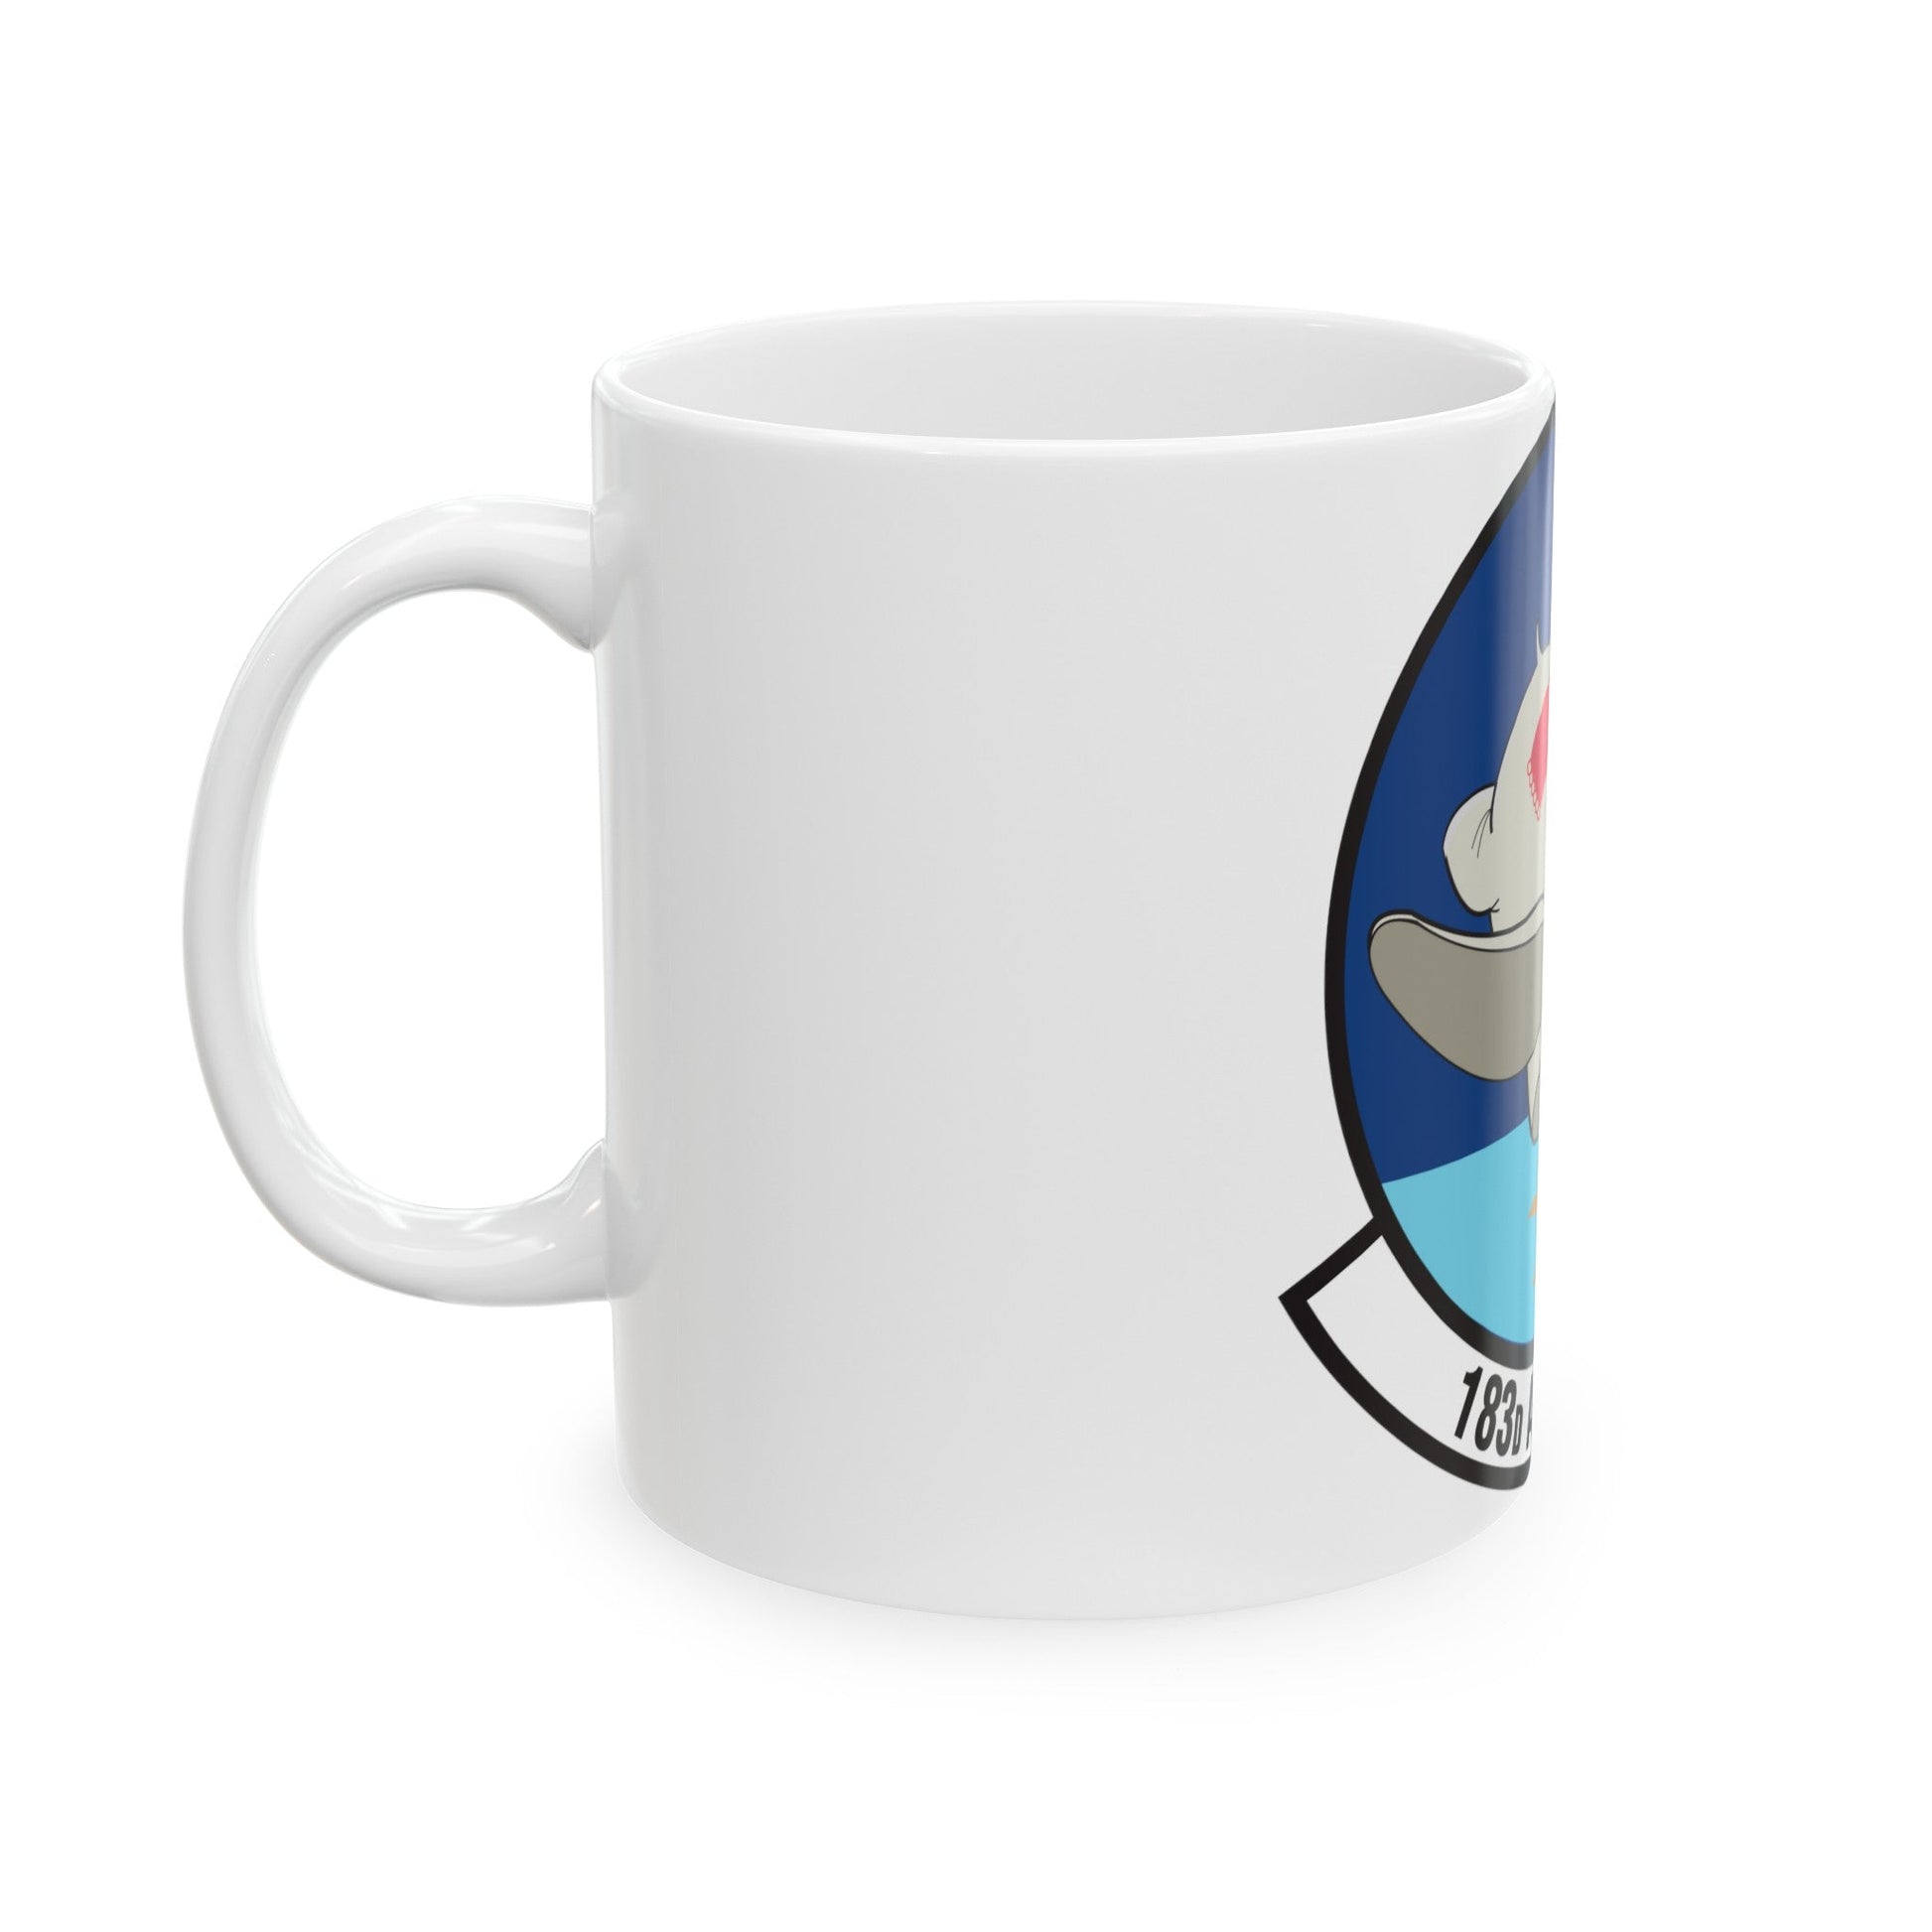 183 Airlift Squadron (U.S. Air Force) White Coffee Mug-The Sticker Space